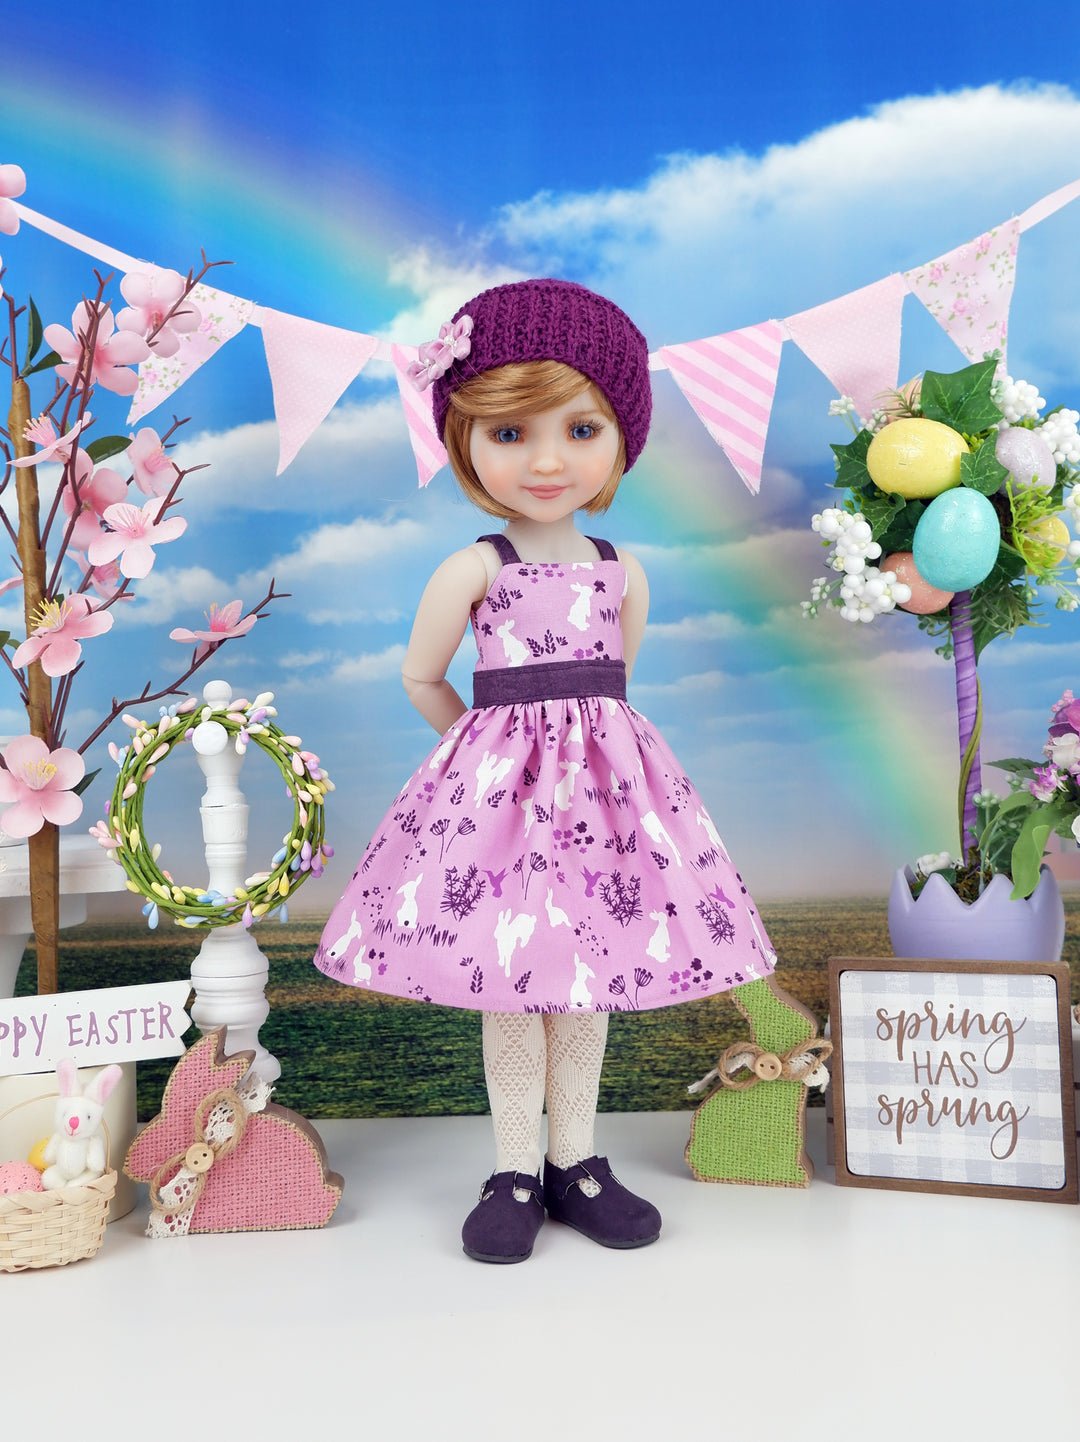 Beautiful Bunny - dress and sweater set with shoes for Ruby Red Fashion Friends doll